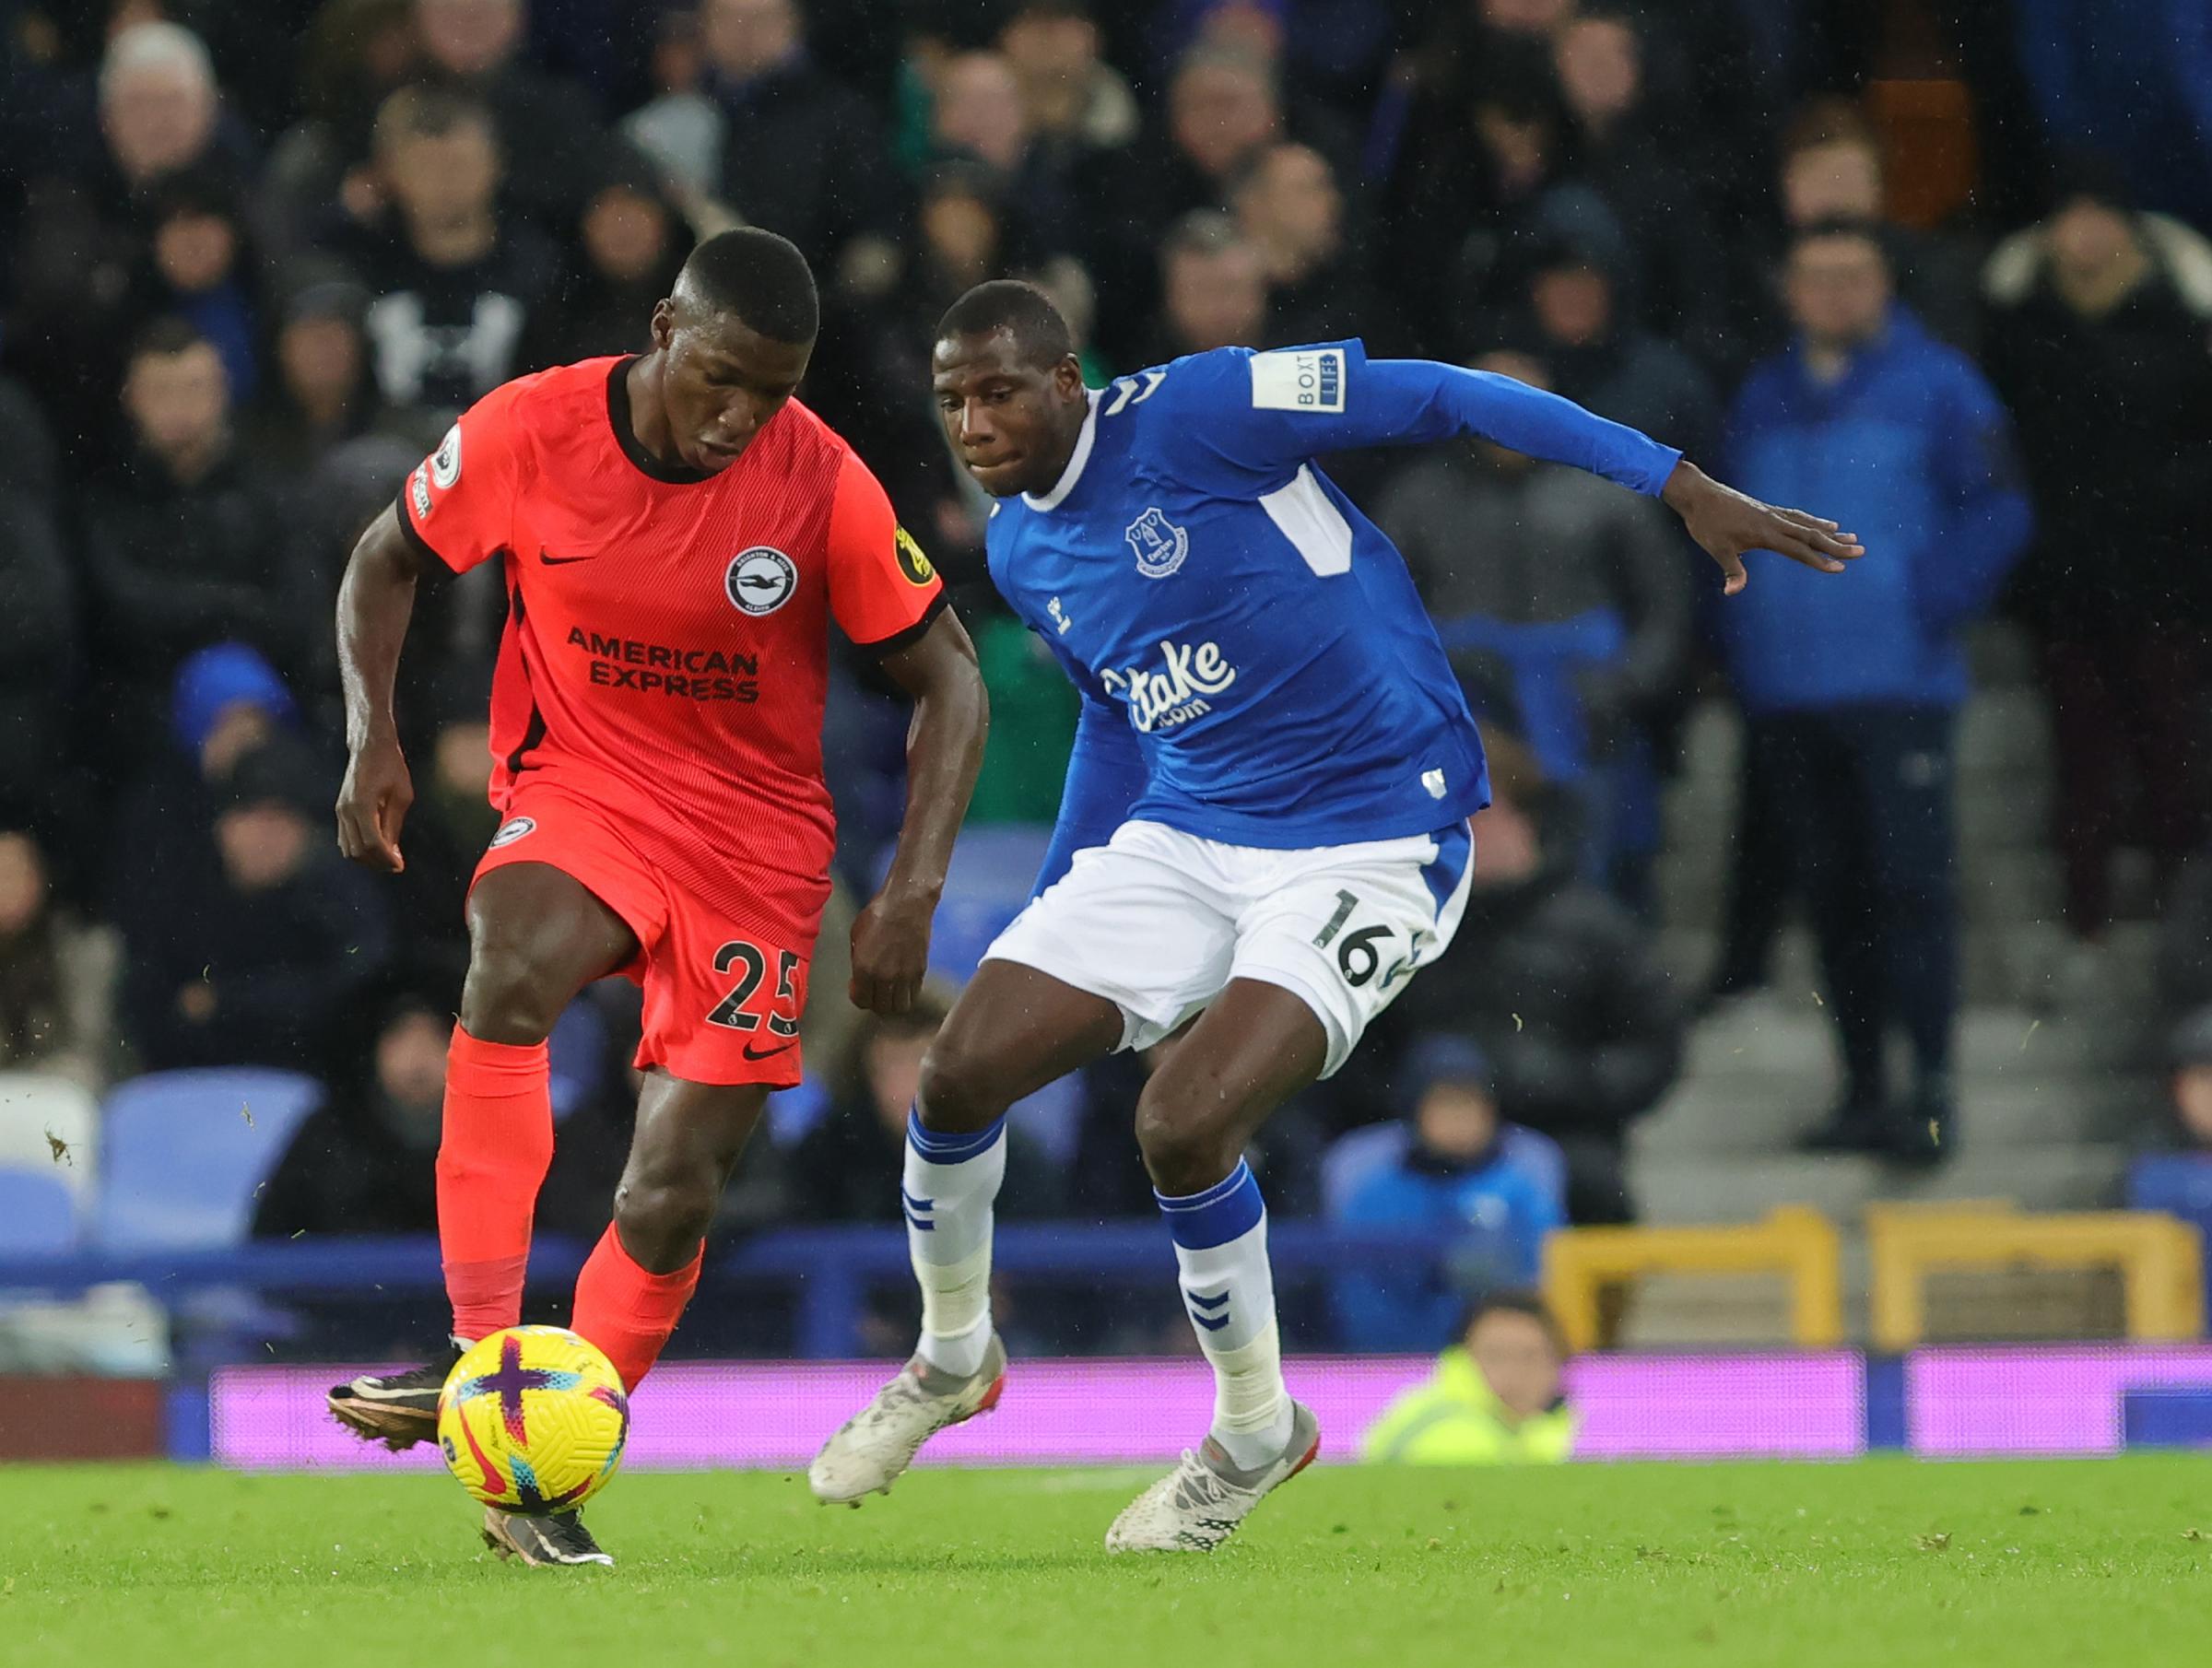 Brighton v Everton - scouting report for clash at the Amex